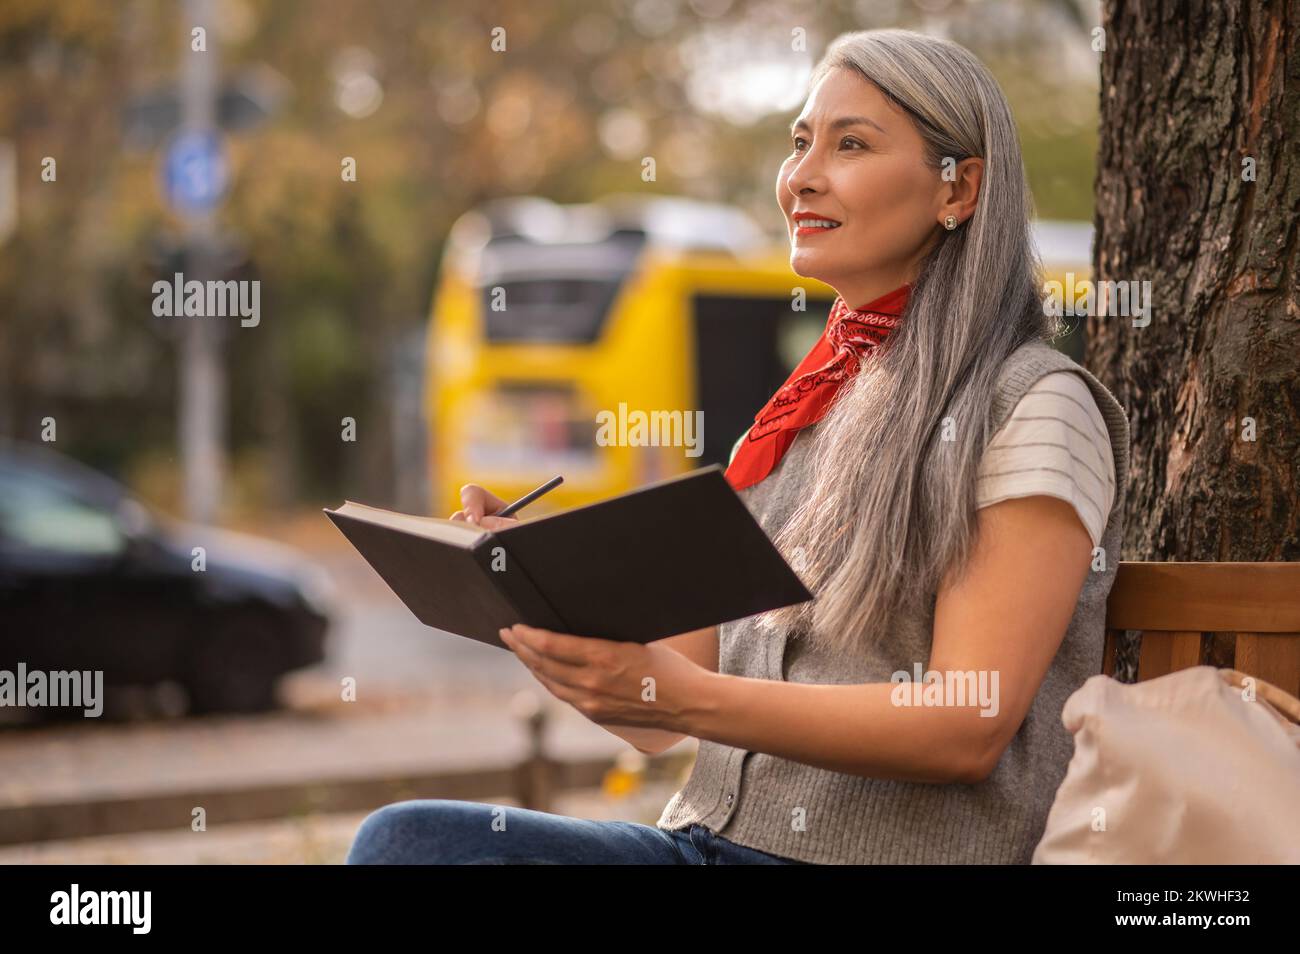 Pretty inspired woman sitting on a bench in the park Stock Photo